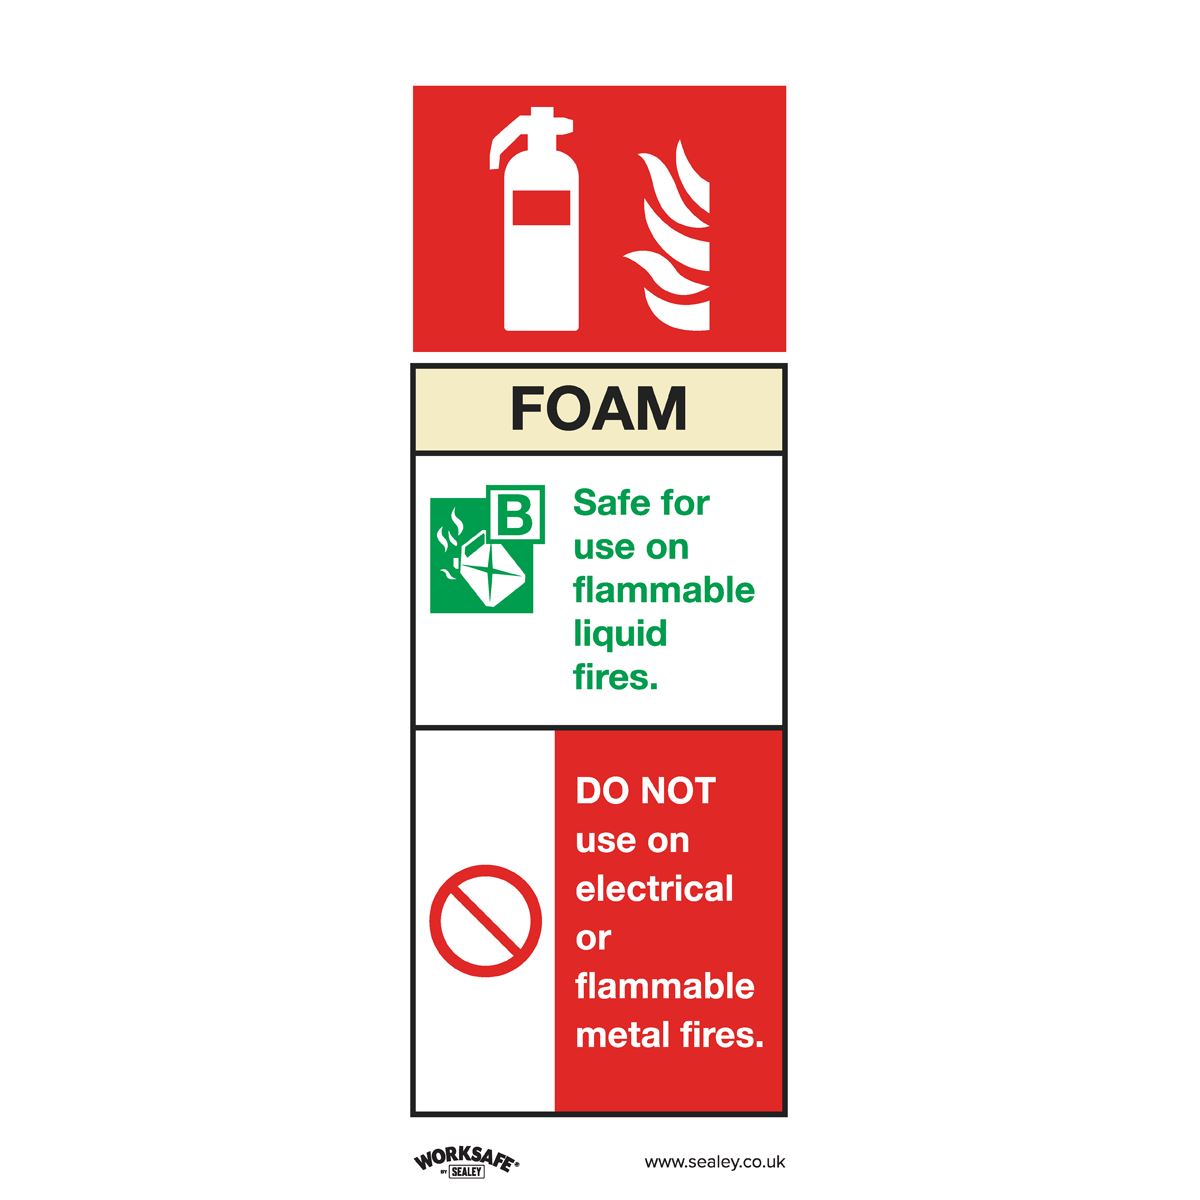 Worksafe by Sealey Safe Conditions Safety Sign - Foam Fire Extinguisher - Self-Adhesive Vinyl - Pack of 10